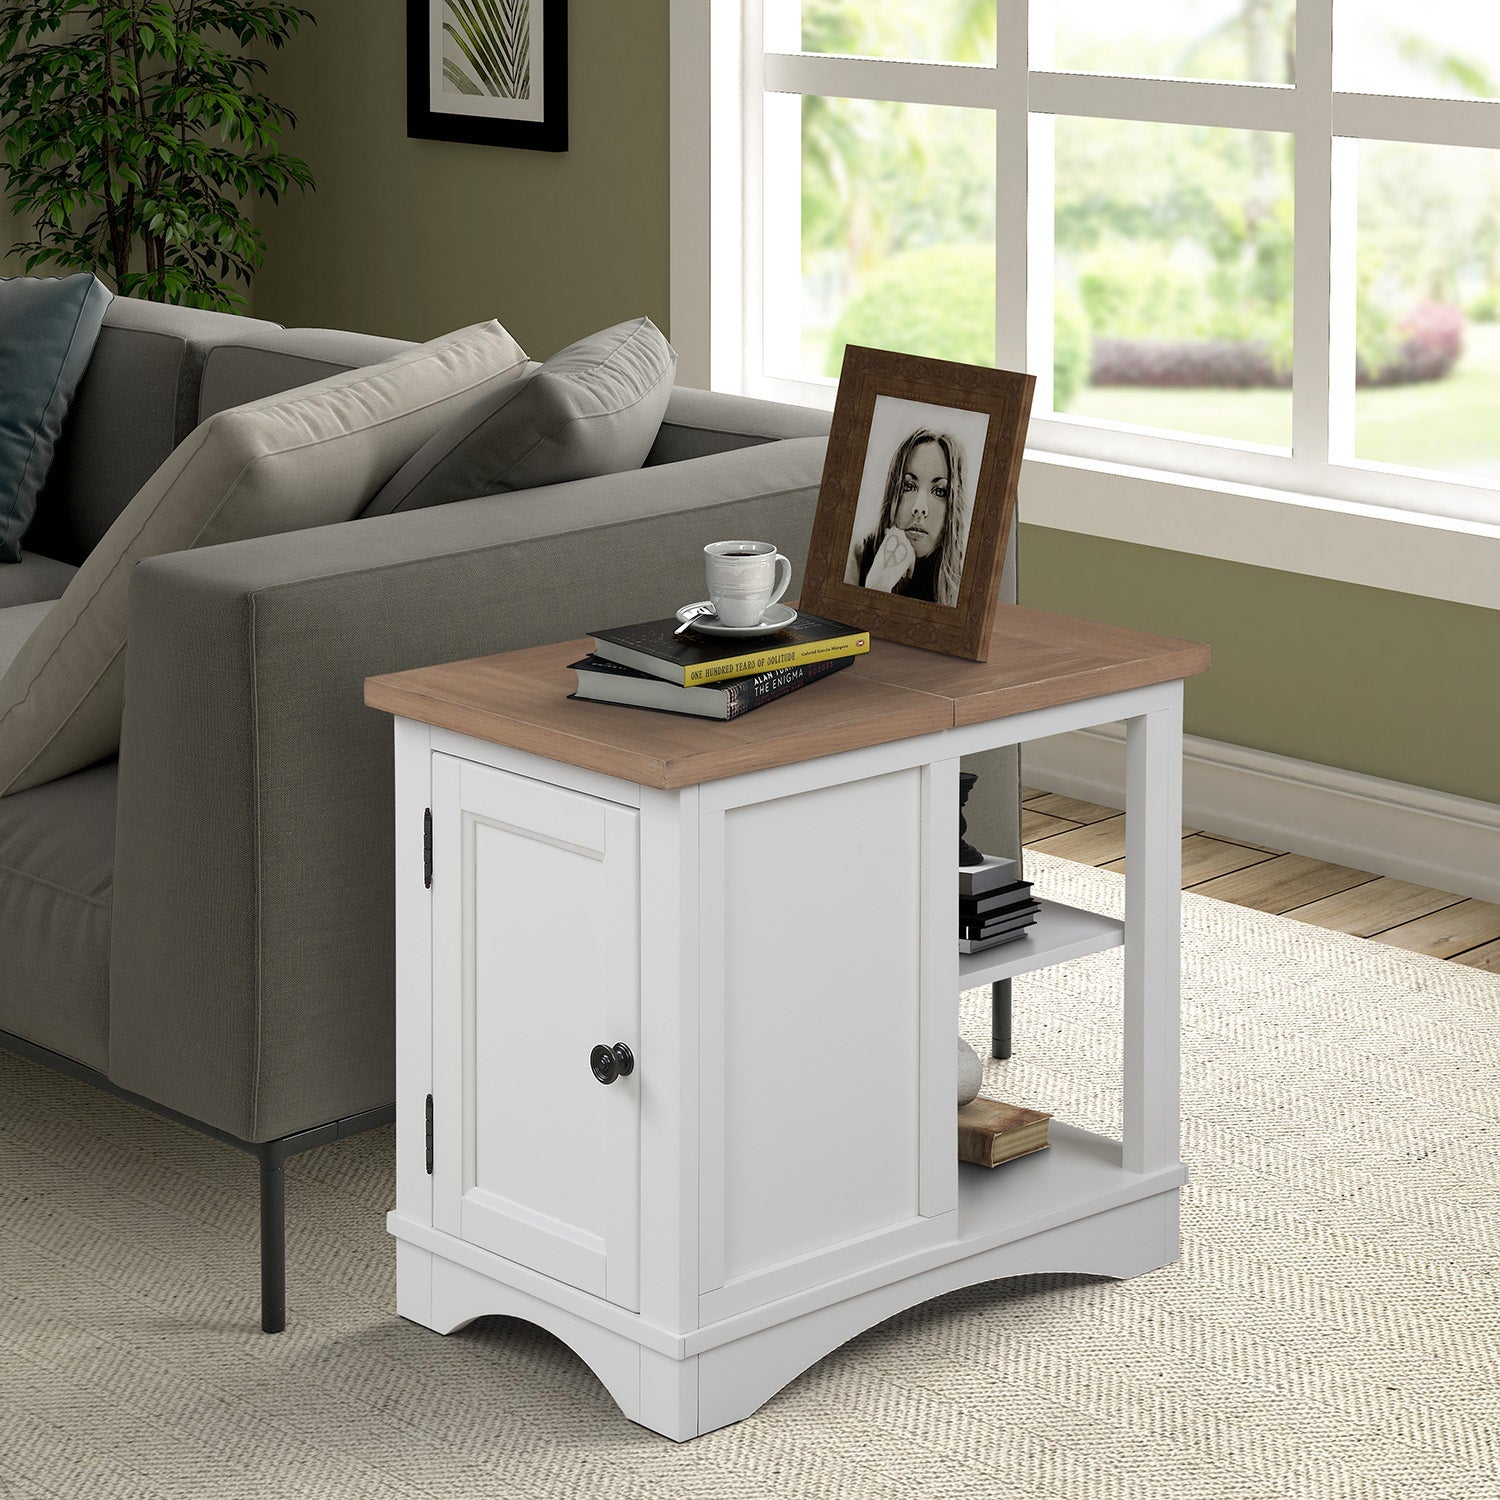 AMERICANA MODERN - COTTON Chairside Table - Parker House Furniture